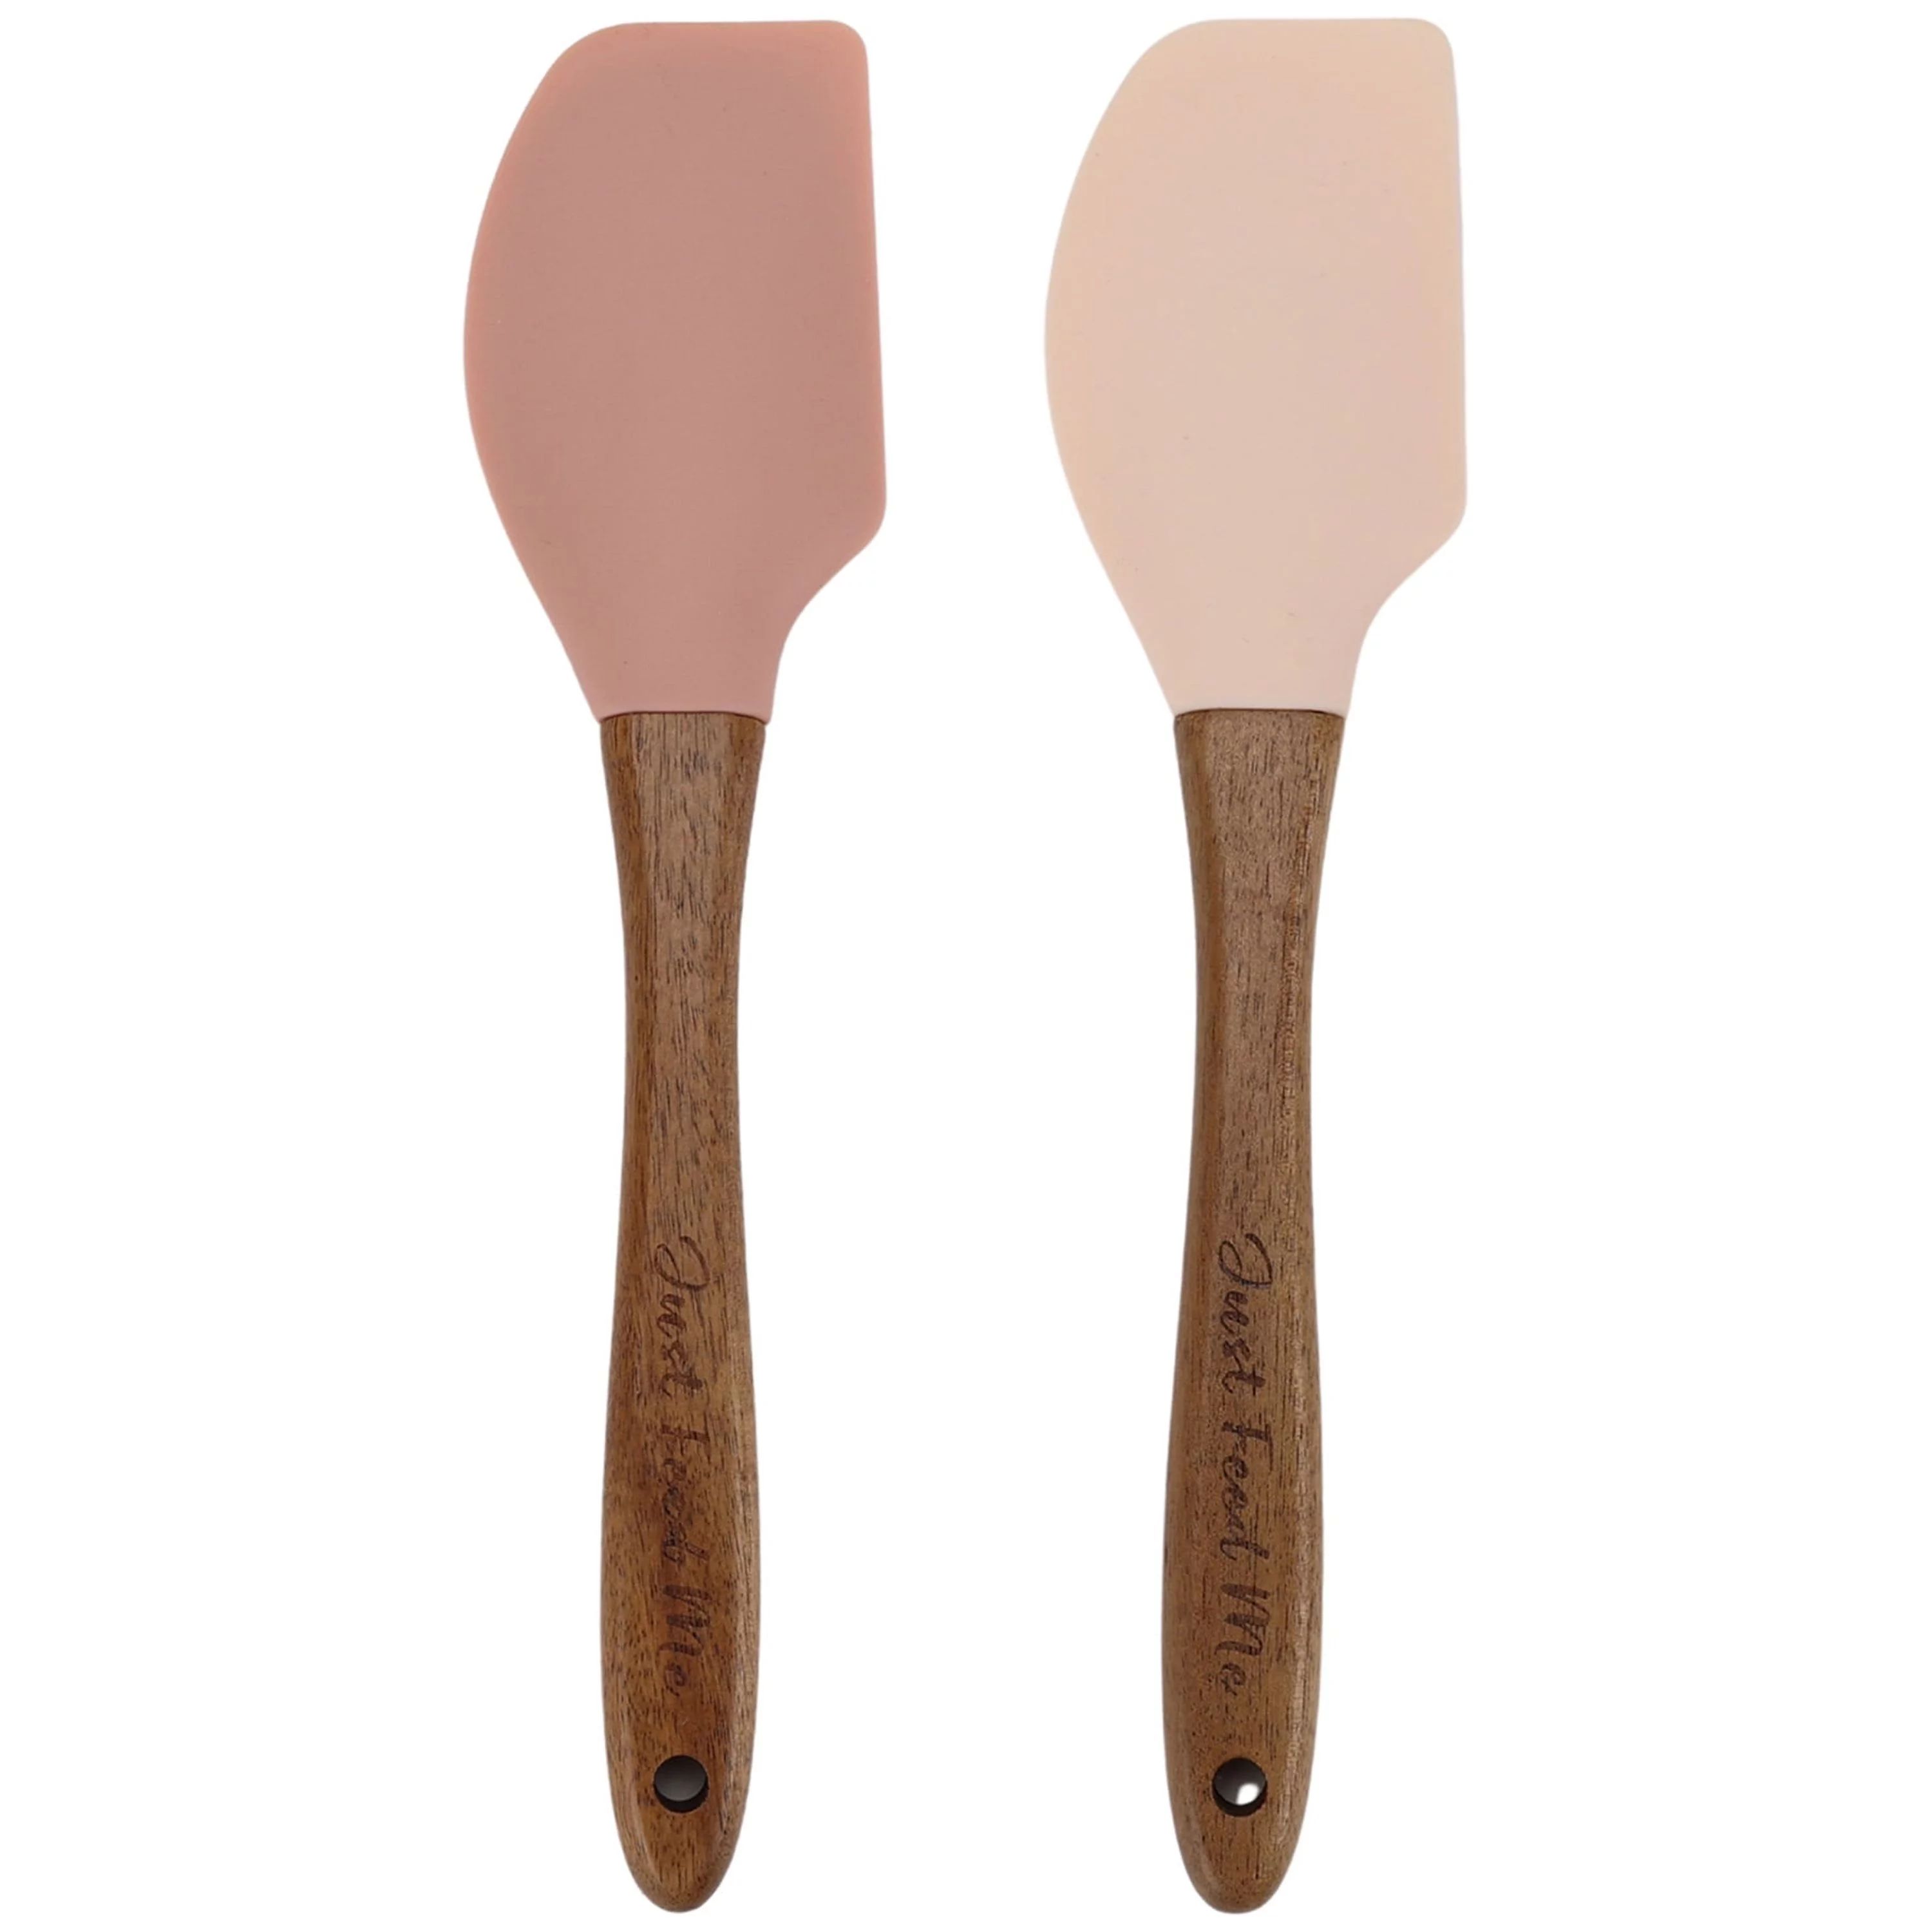 Just Feed Me by Jessie James Decker 2-Piece Silicone Spatula with Wooden Handle, Terracotta Rose ... | Walmart (US)